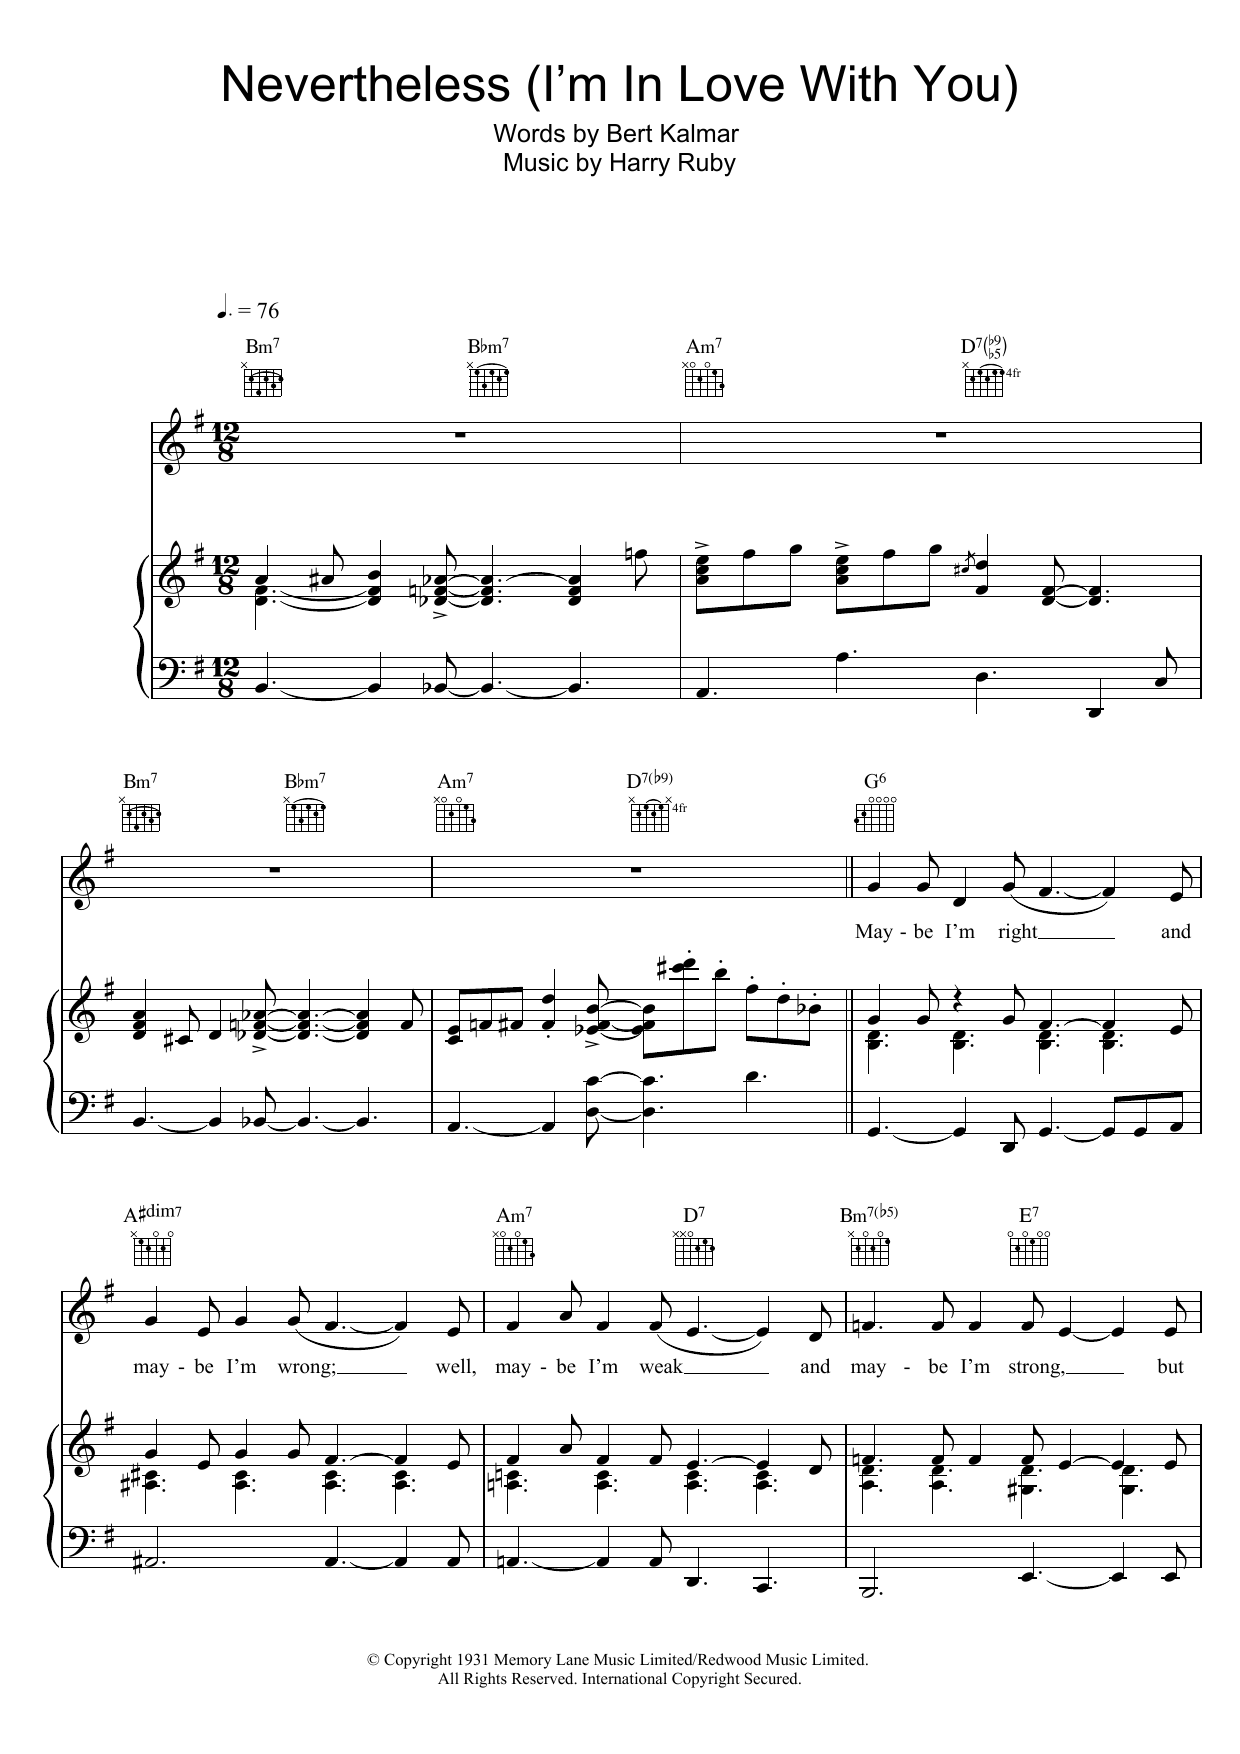 Download Michael Buble Nevertheless (I'm In Love With You) Sheet Music